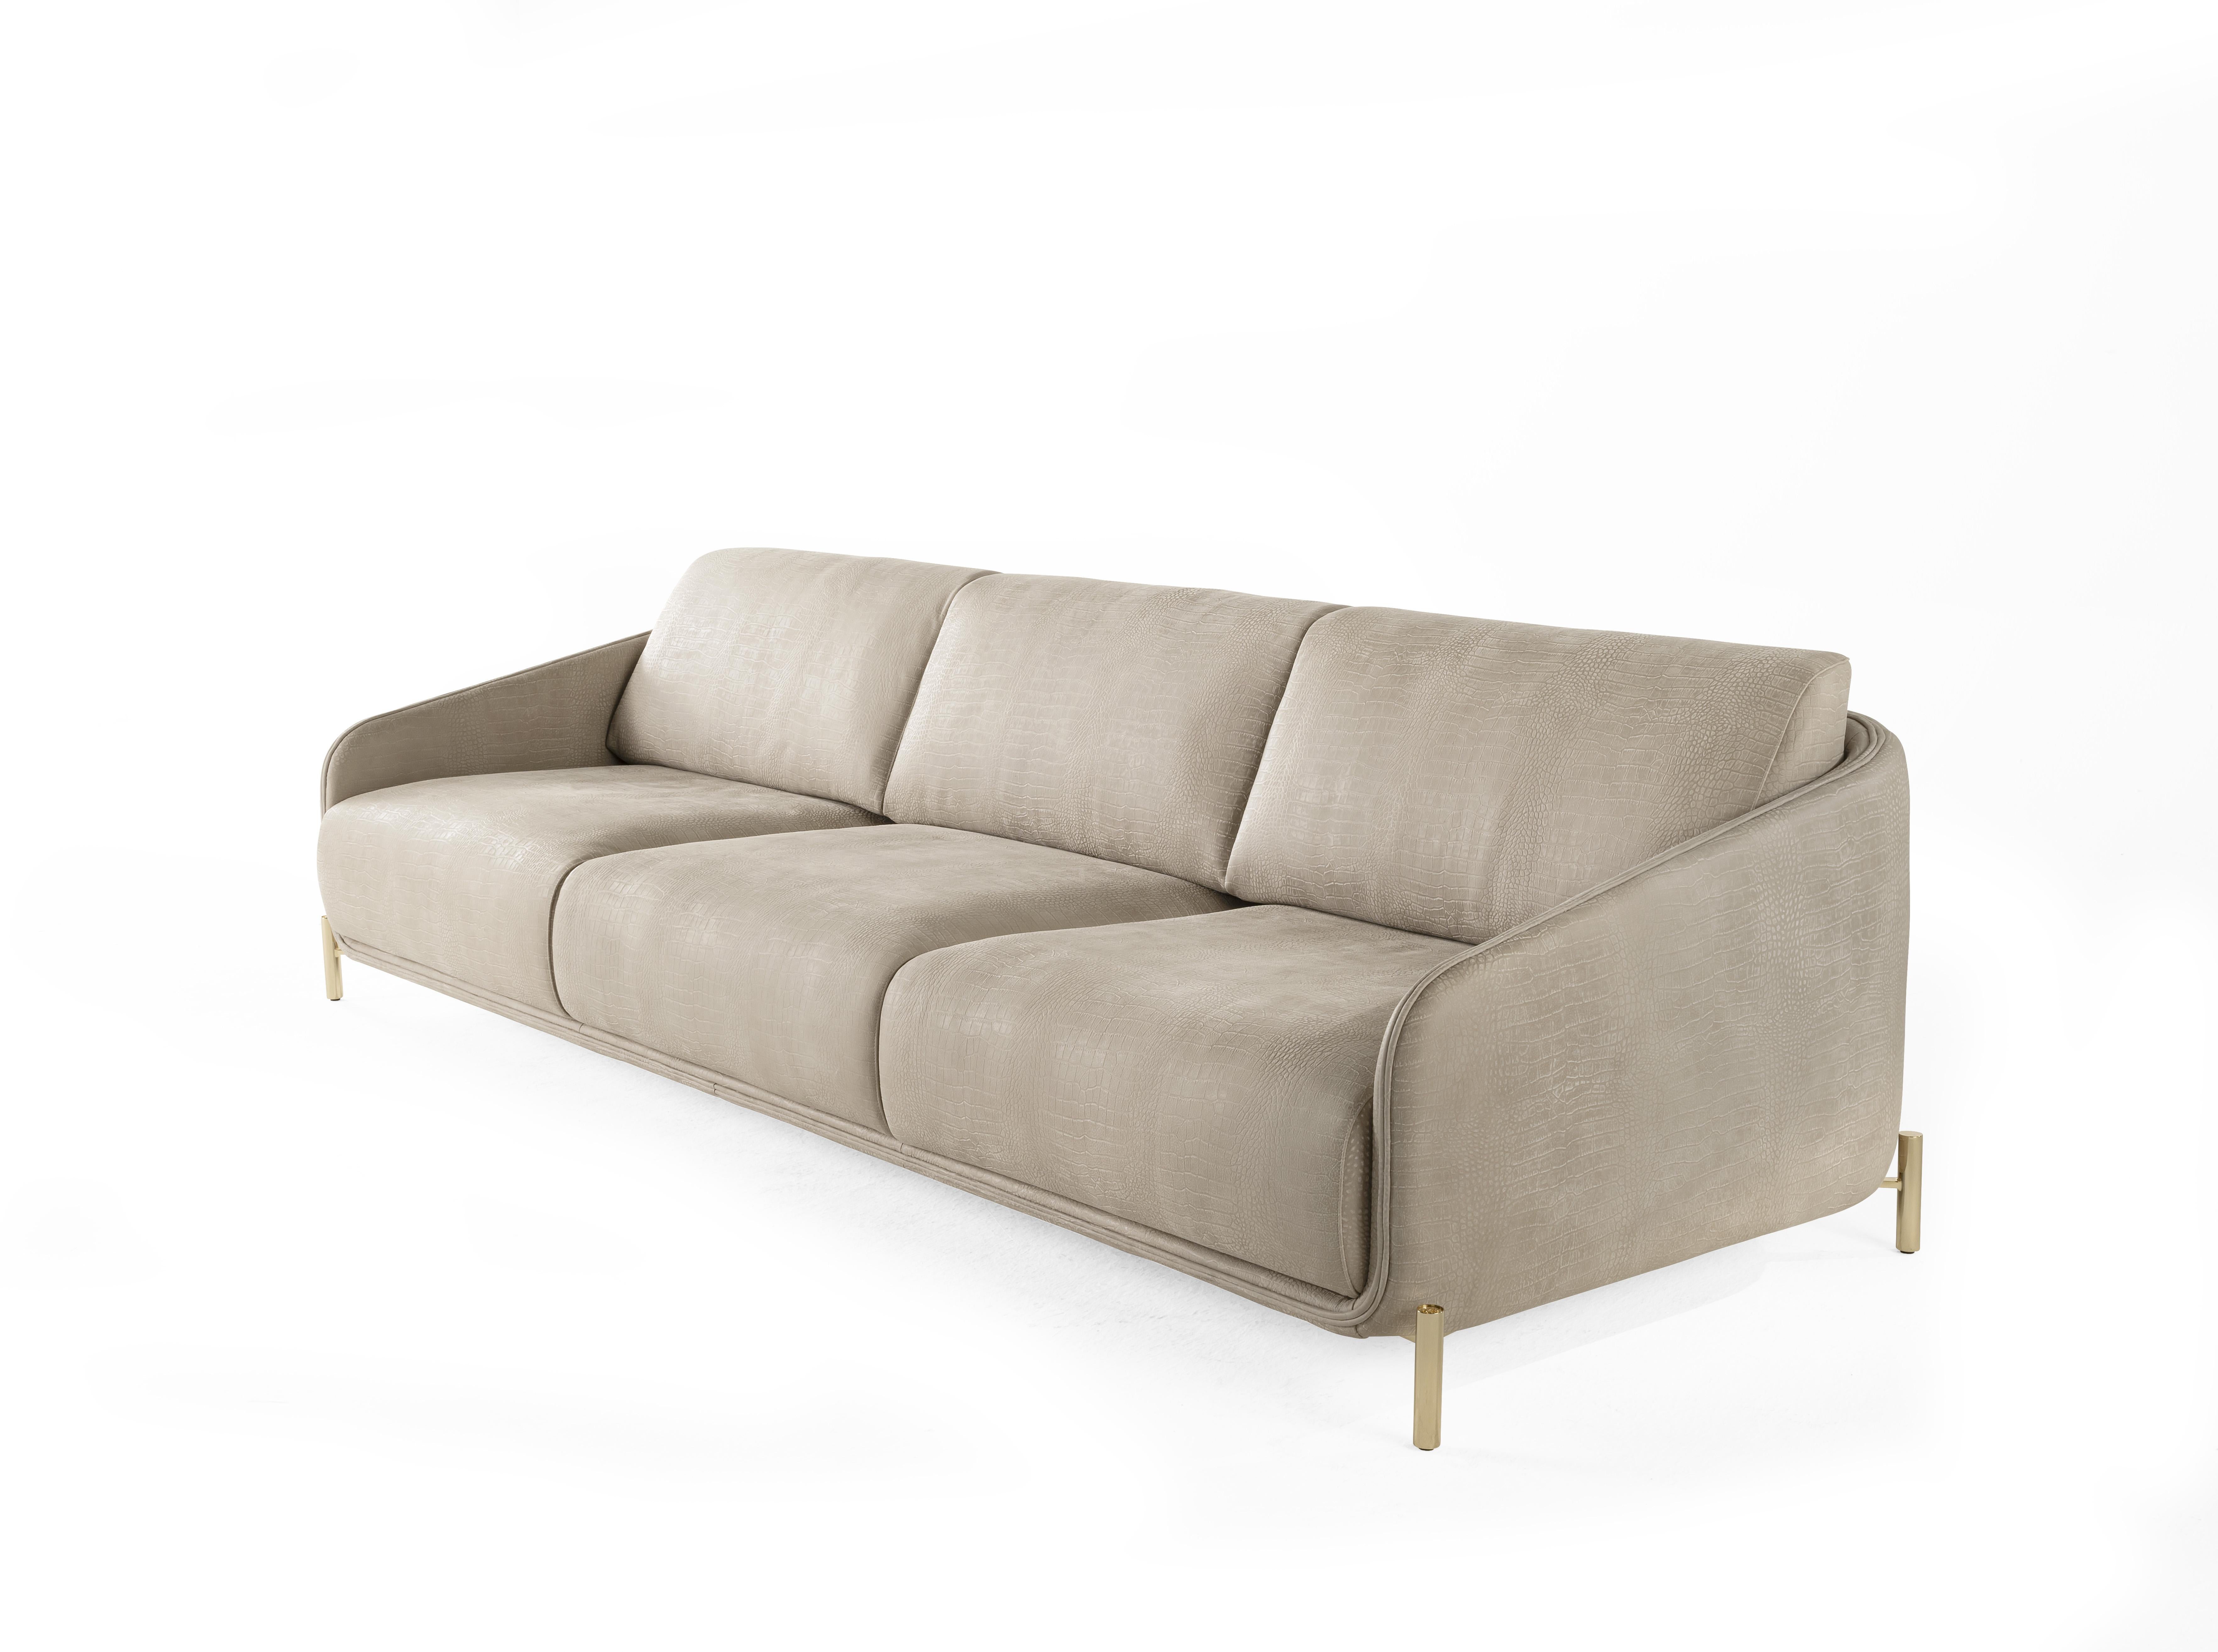 Modern 21st Century Clifton Sofa in Leather by Roberto Cavalli Home Interiors For Sale